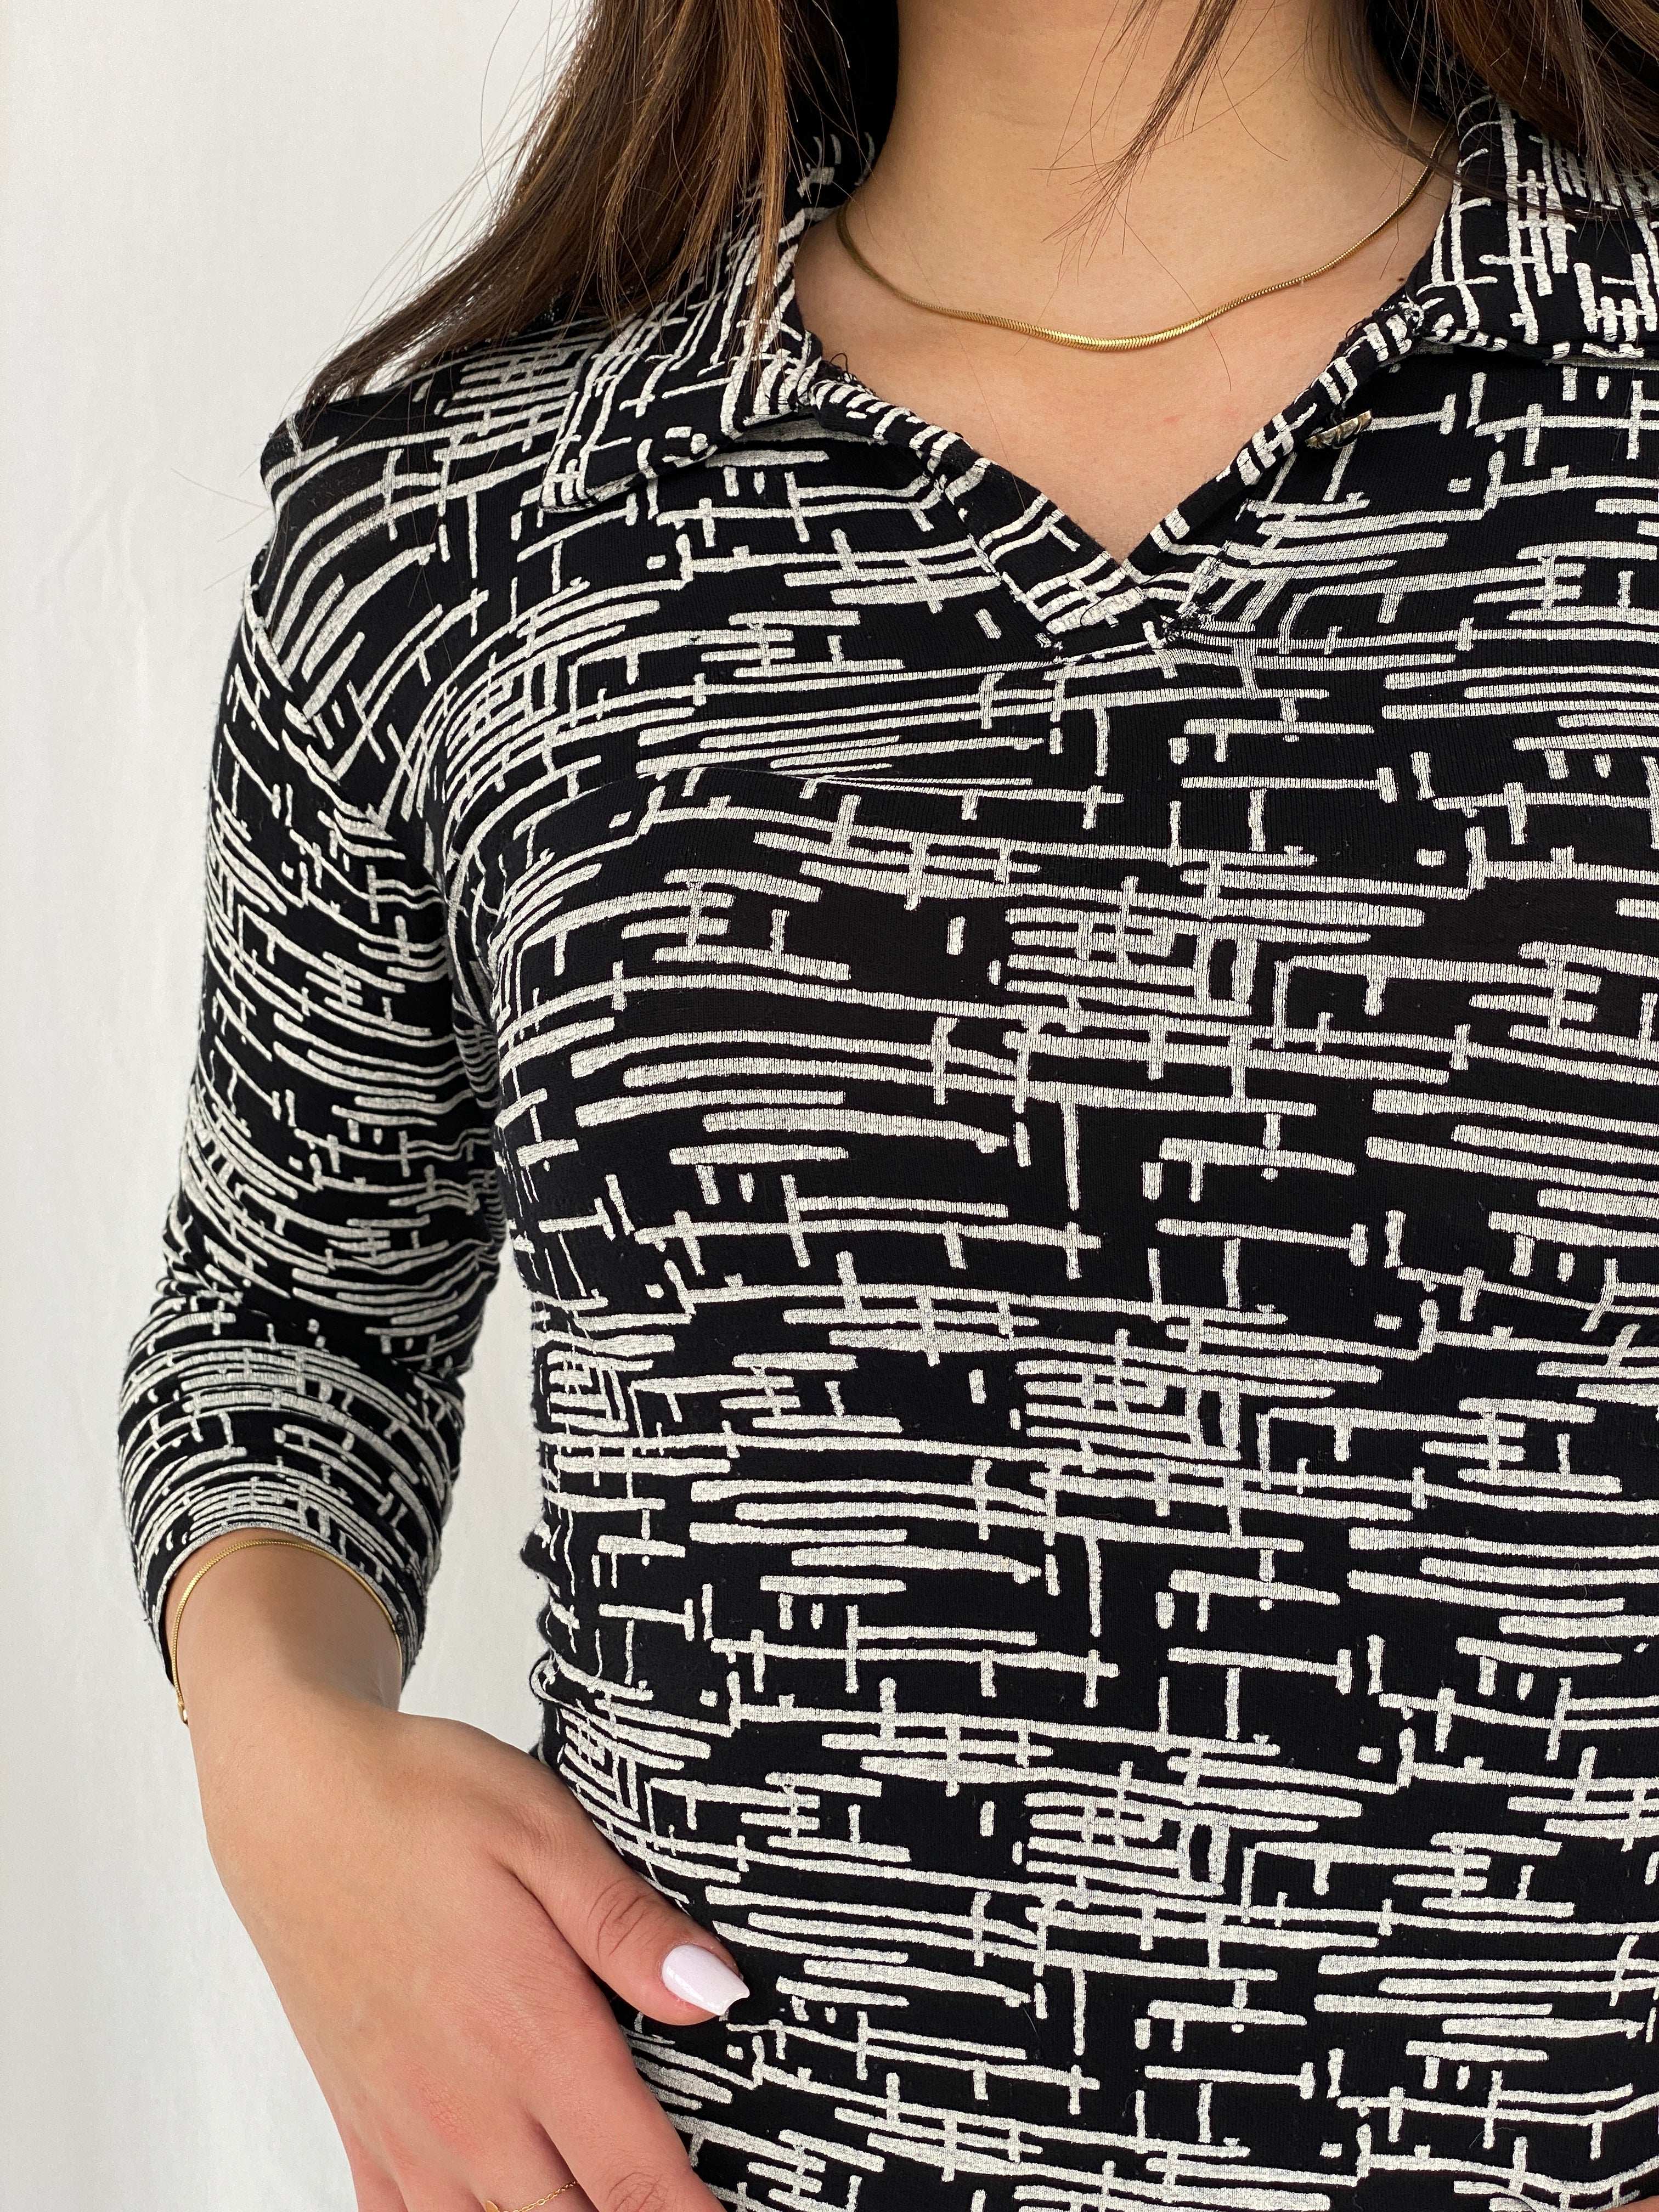 Vintage Y2K Black and White Full Sleeve Top - Size M - Balagan Vintage Full Sleeve Top 00s, full sleeve top, NEW IN, Rama